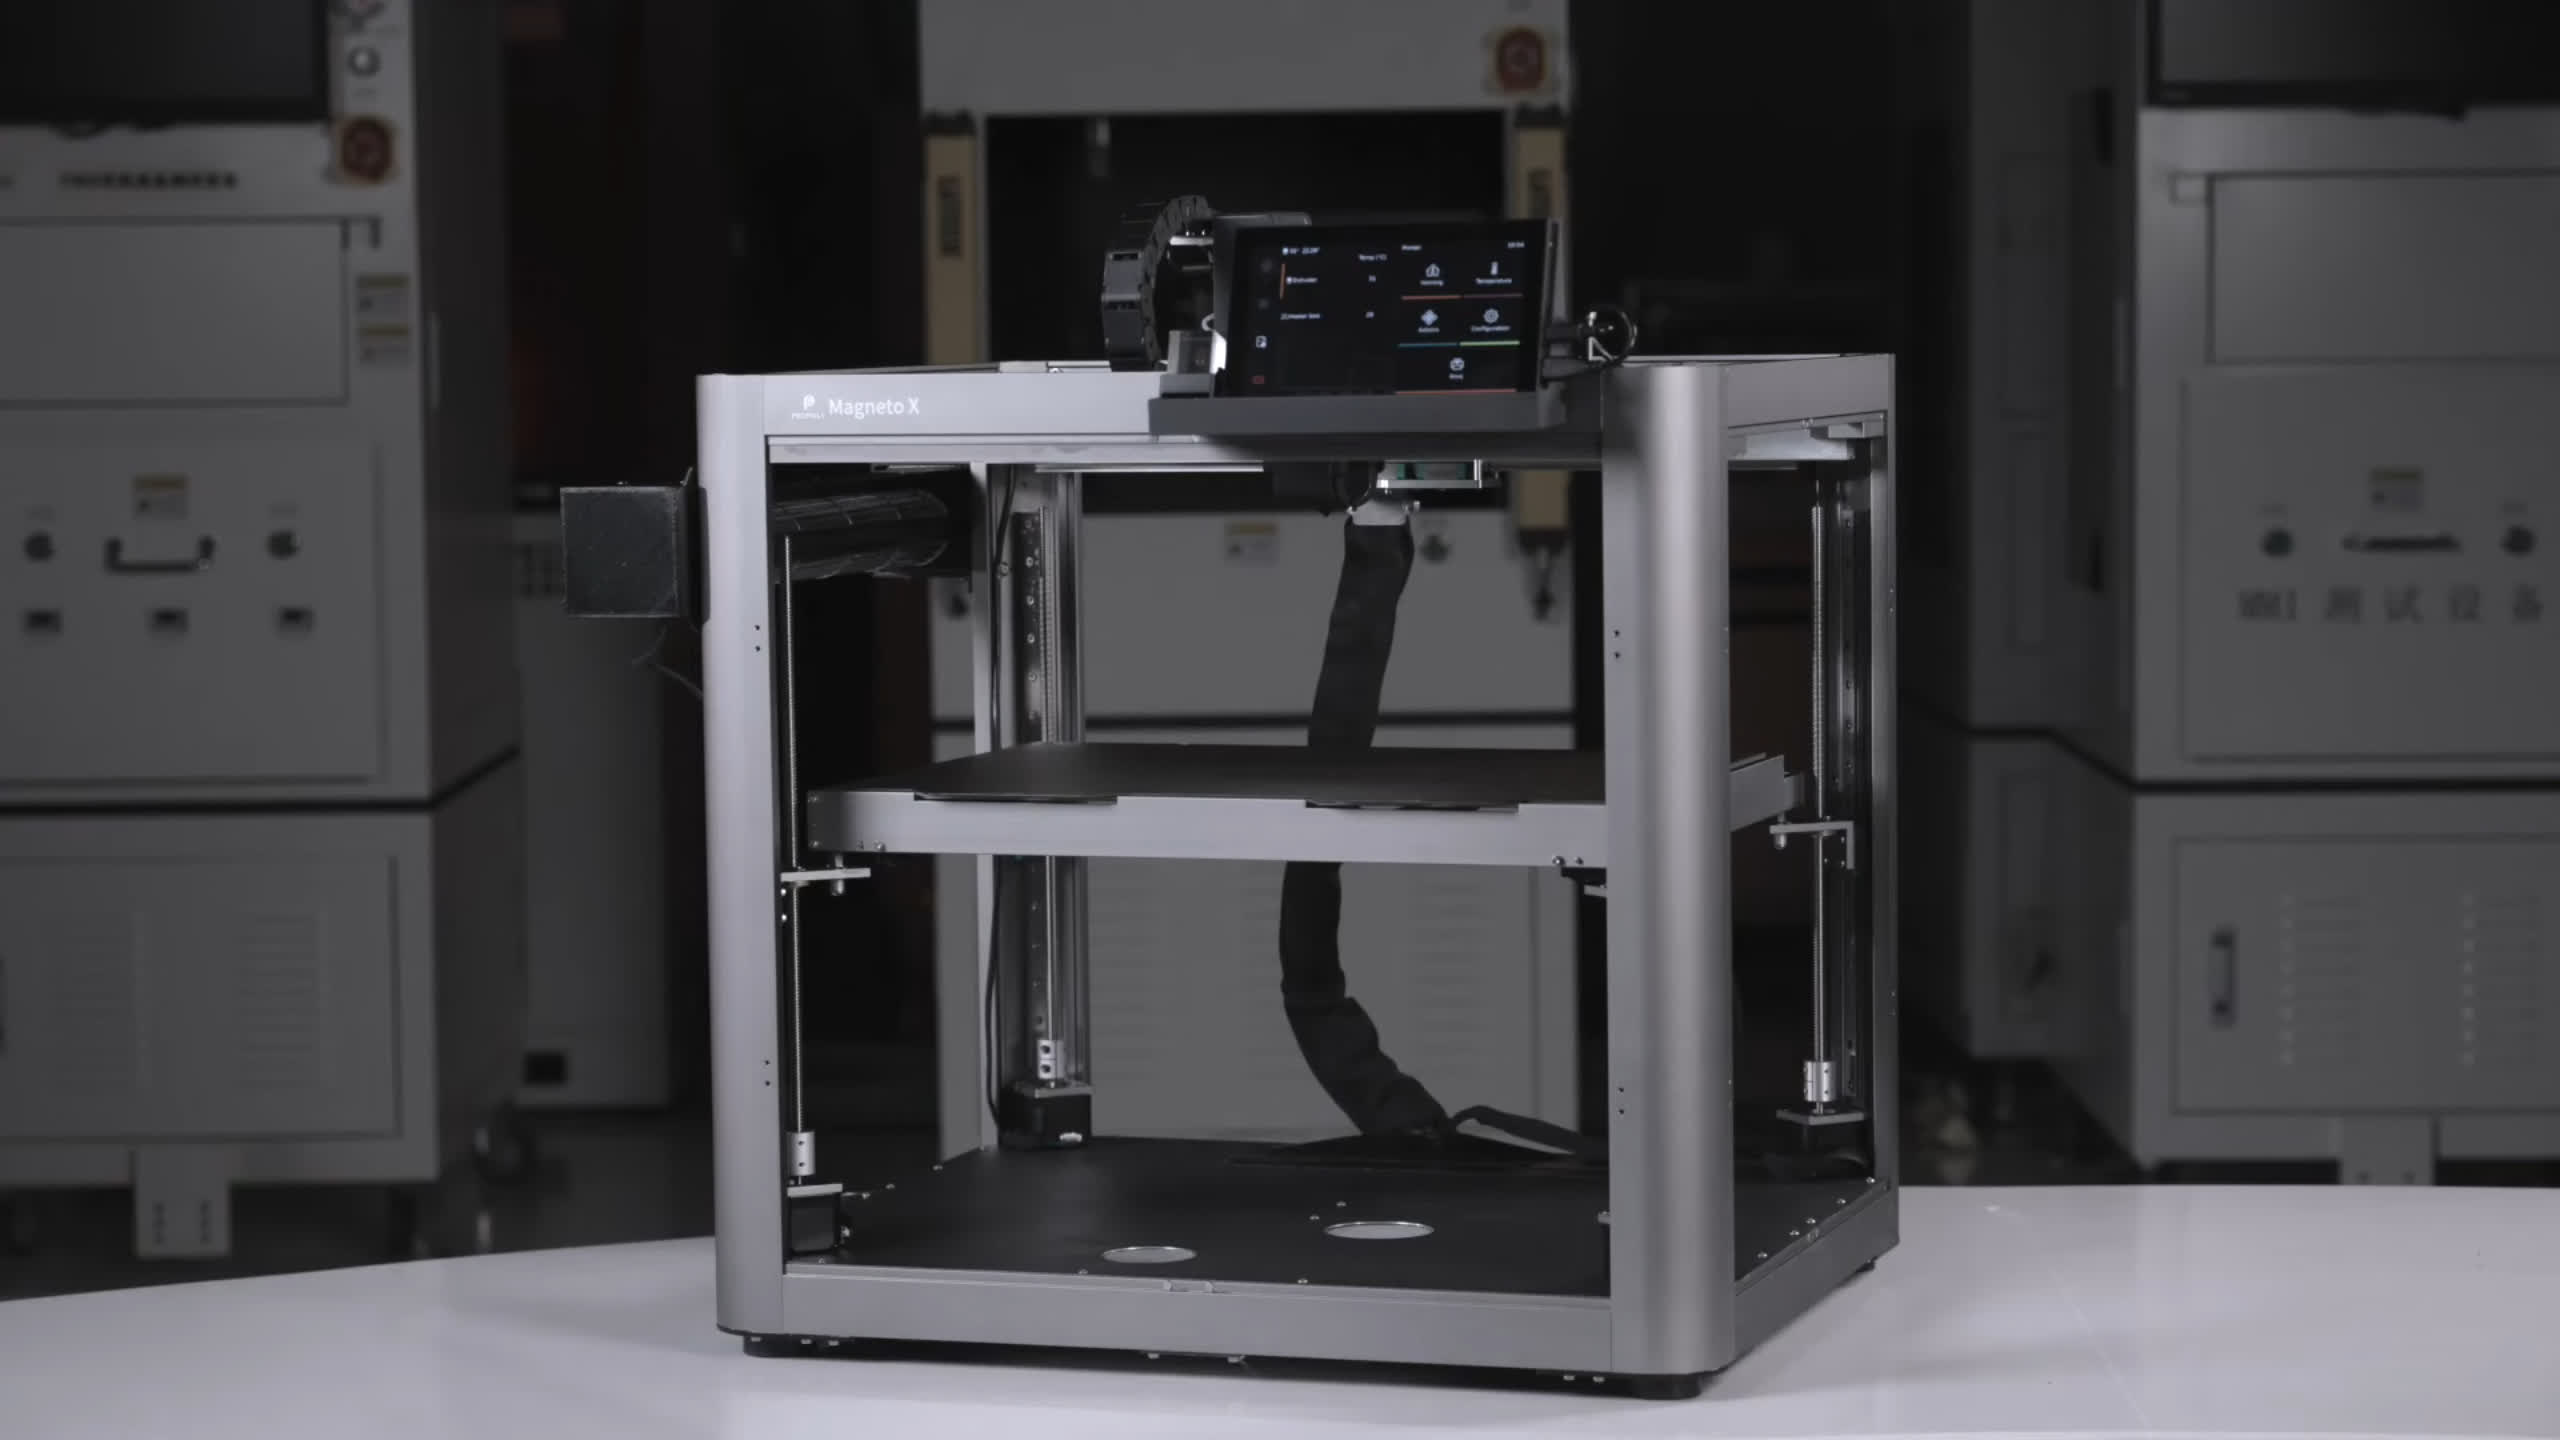 Magneto X 3D printer uses maglev motor system for speed and precision